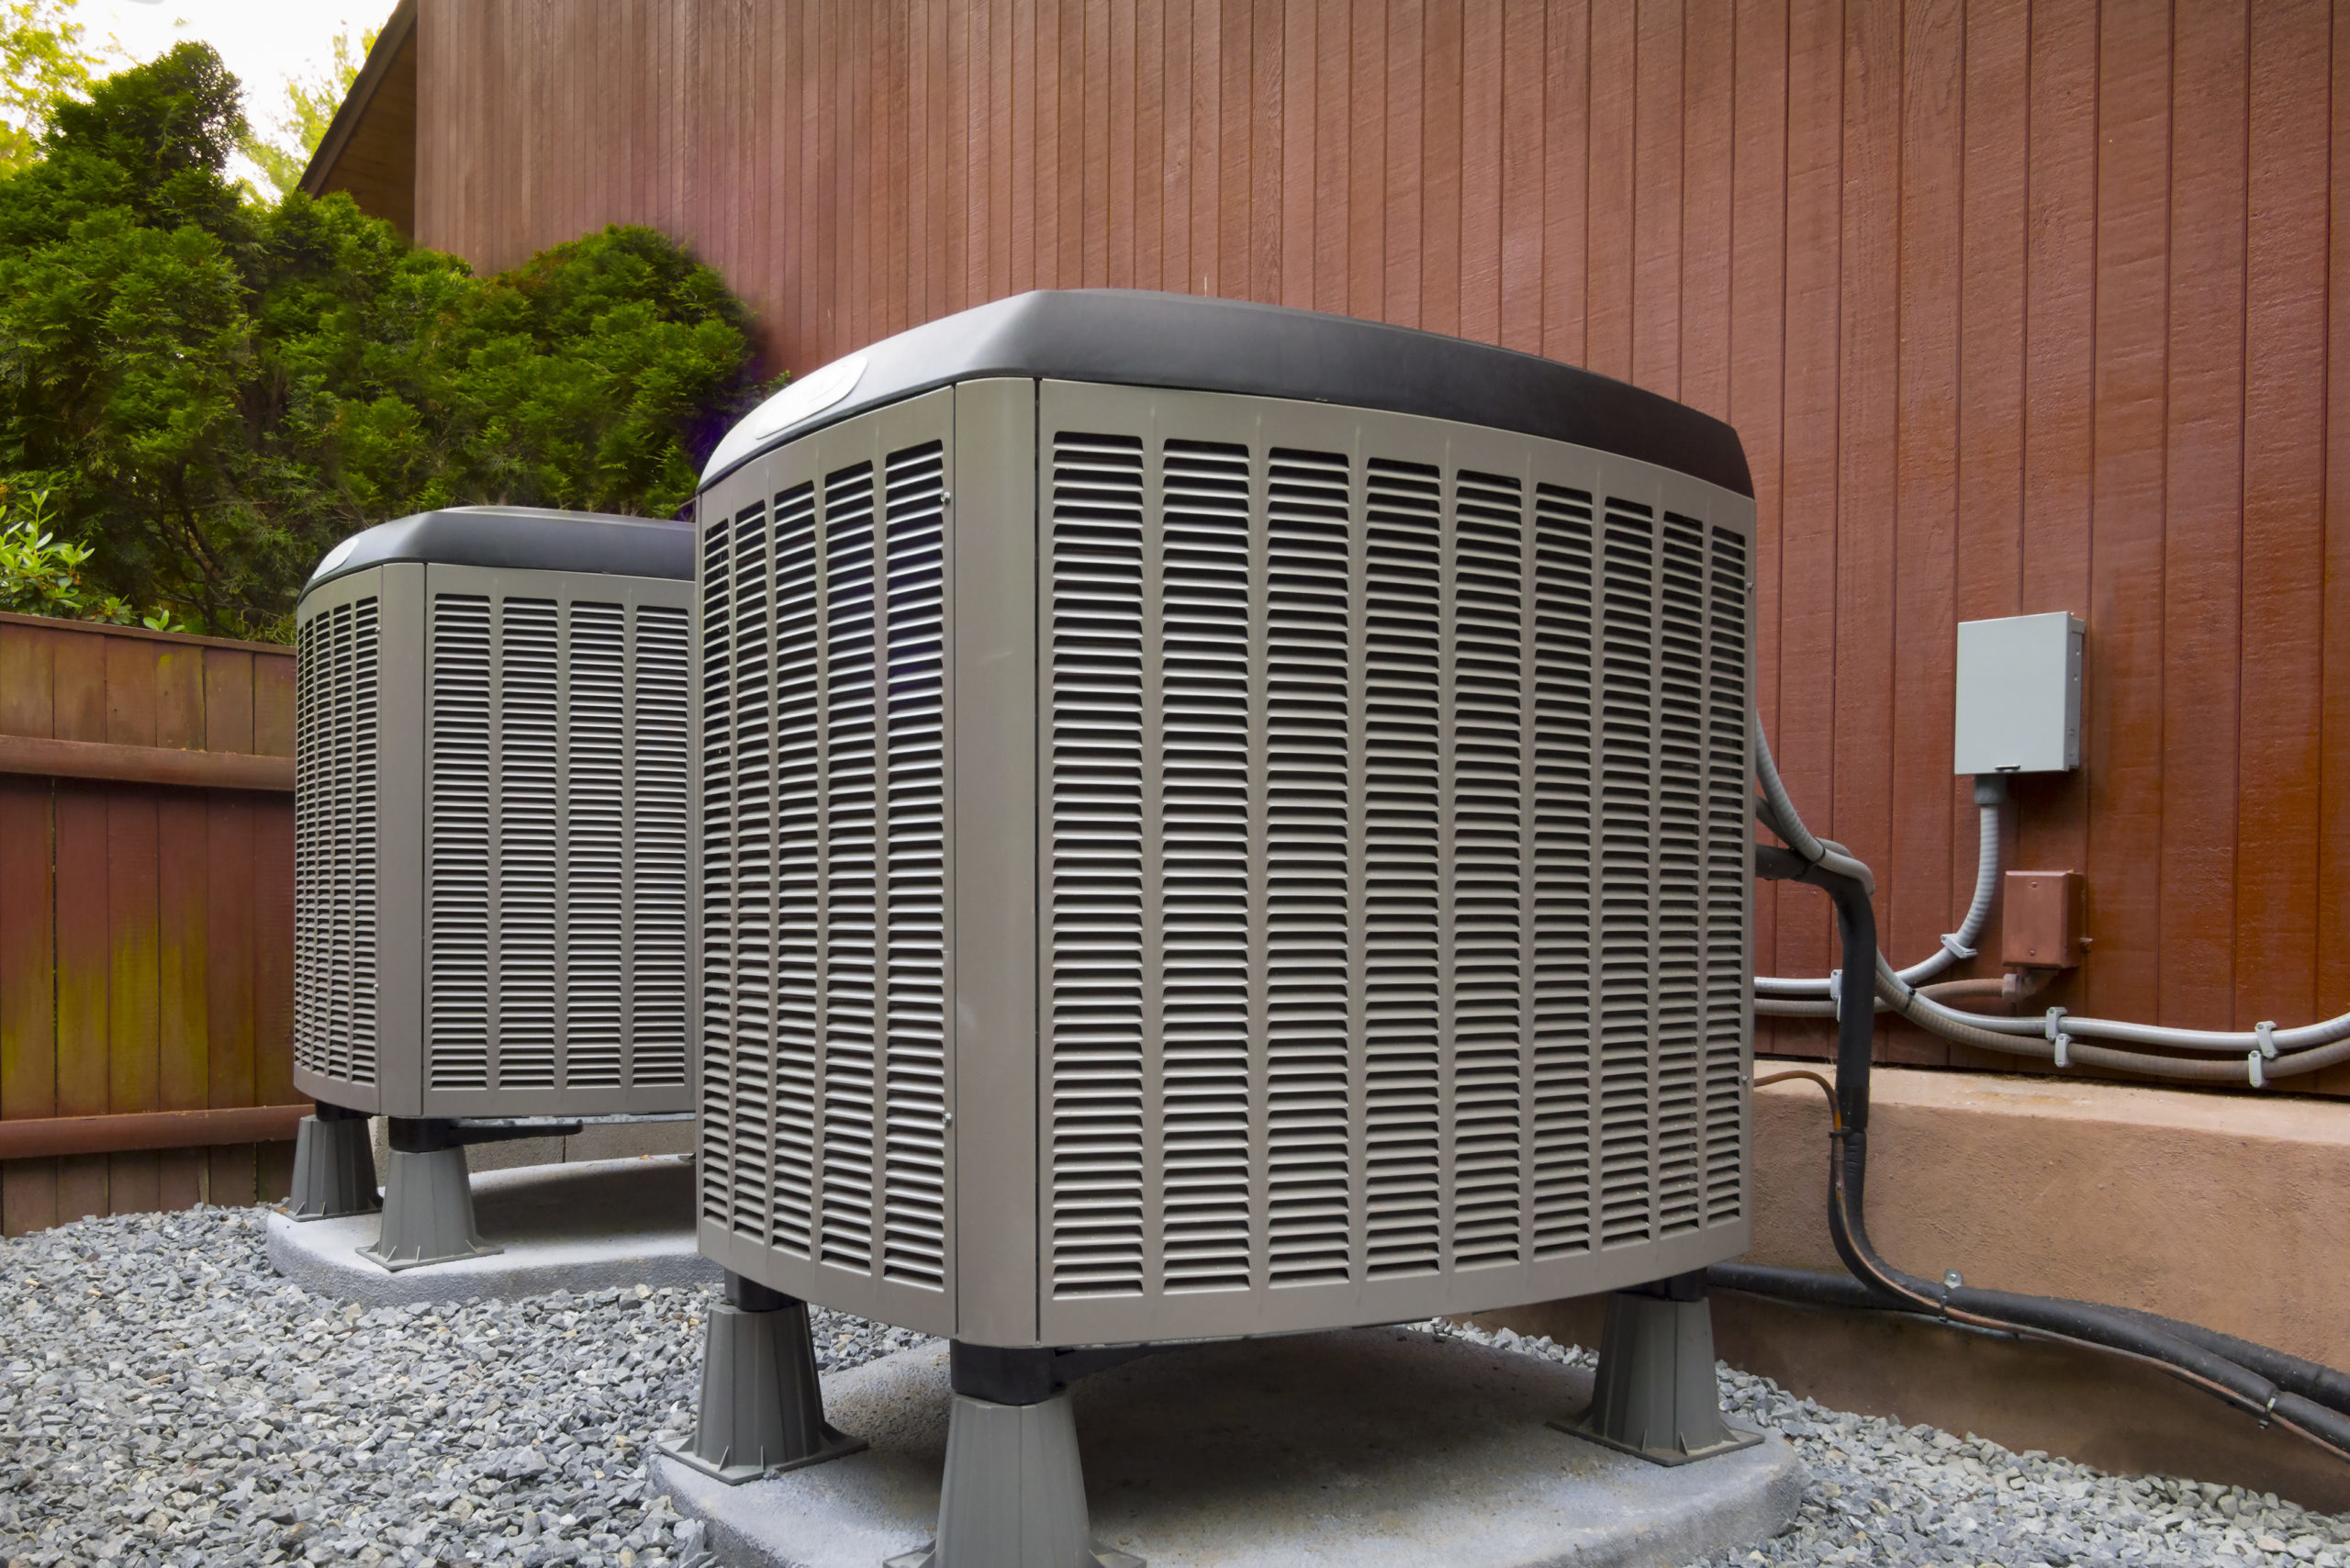 HVAC heating and air conditioning residential units** Note: Soft Focus at 100%, best at smaller sizes